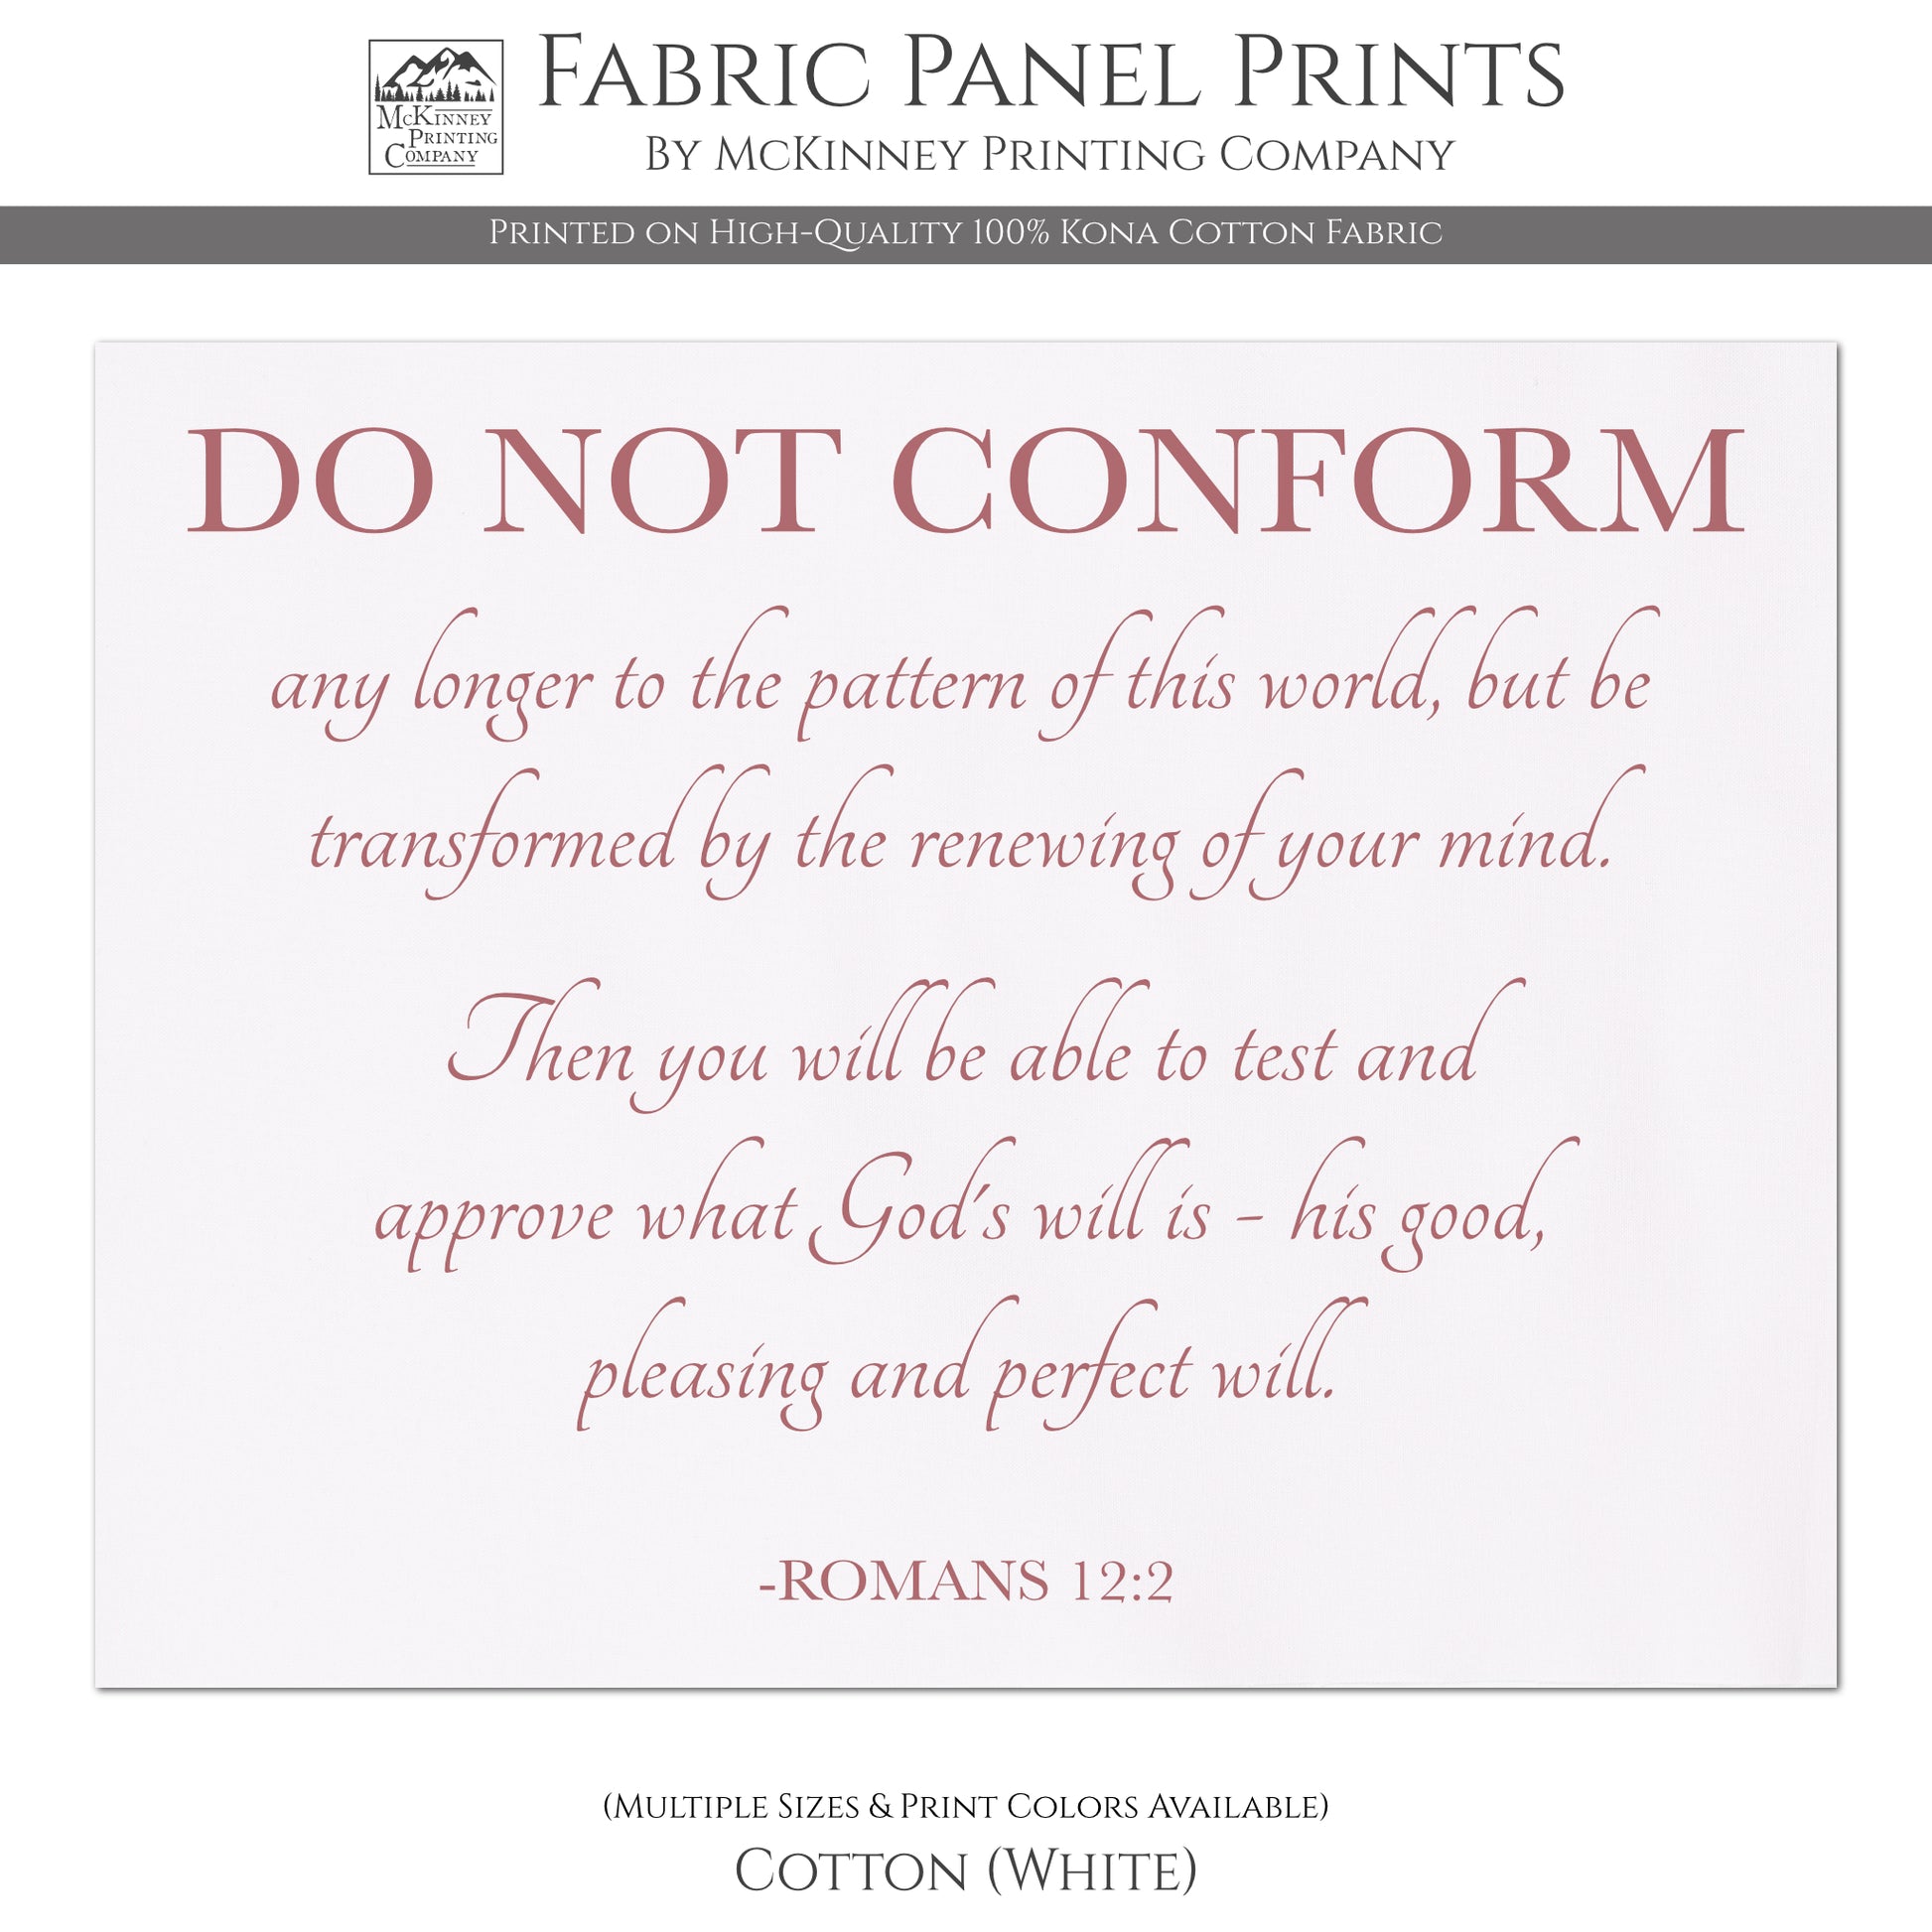 Romans 12 2 - Do Not Conform any longer to the pattern of this world, but be transformed by the renewing of your mind. Then you will be able to test and approve what God's will is - his good, pleasing and perfect will. Romans 12:2 - Fabric Panel Print, Quilt, Quilting, Sewing, Crafts - Cotton, White